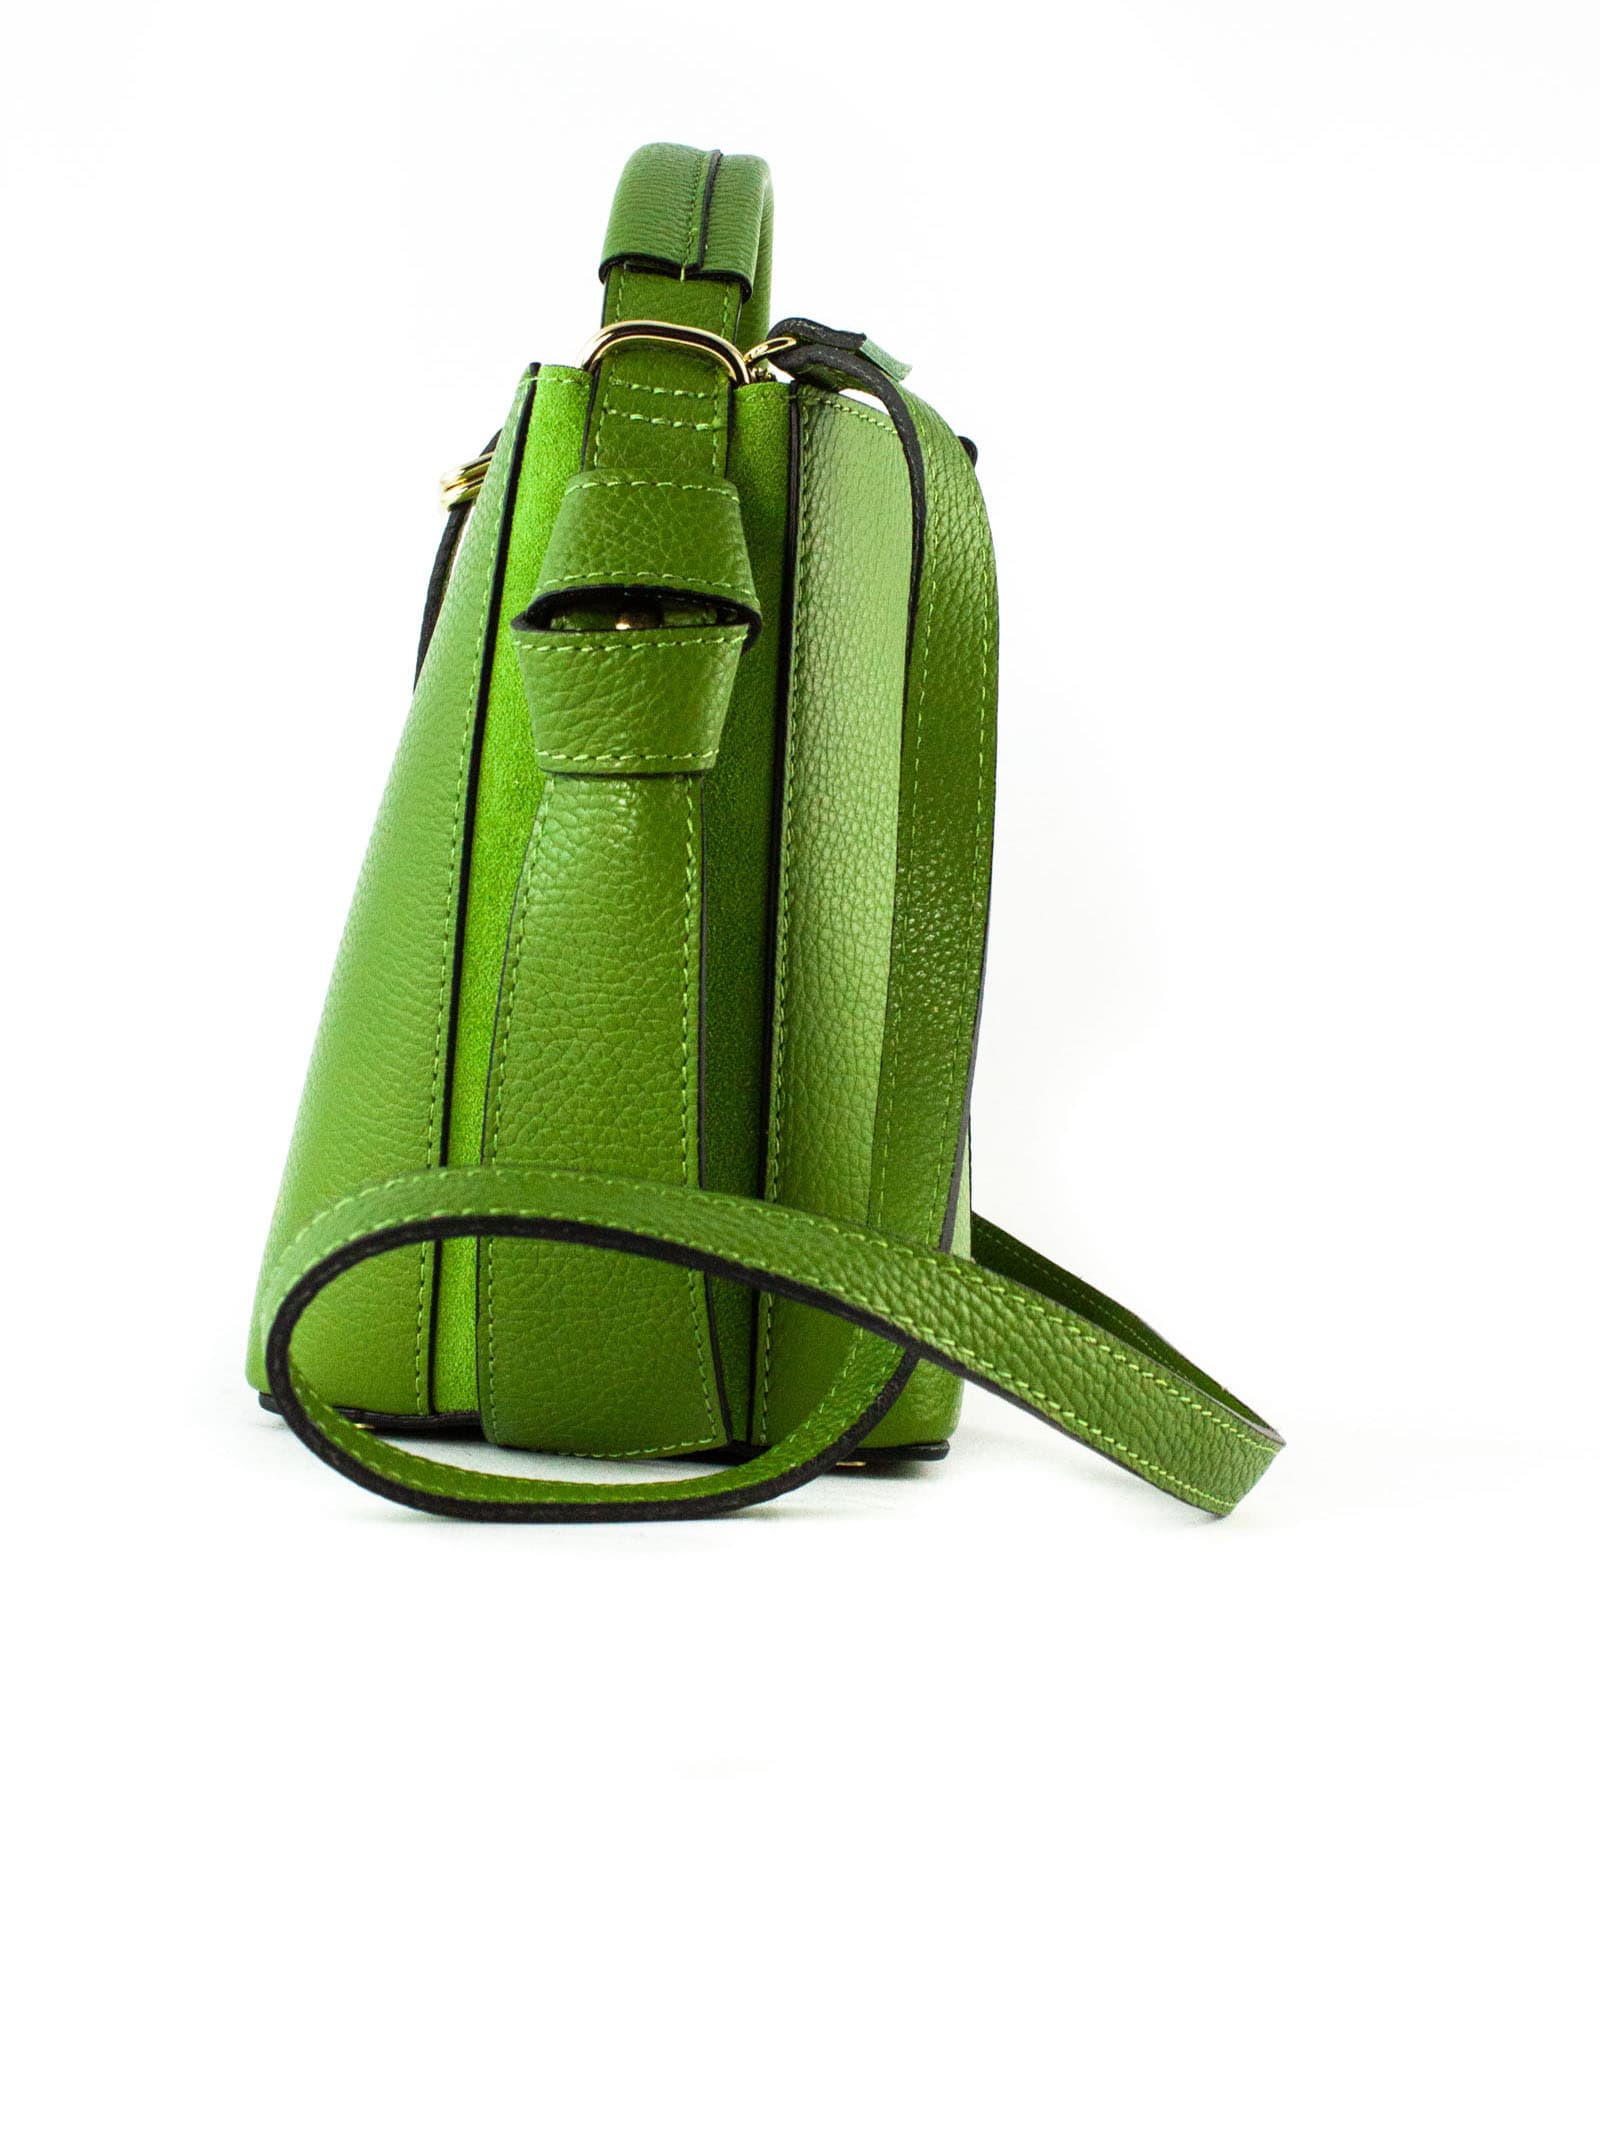 Shop Avenue 67 Green Grained Leather Bag